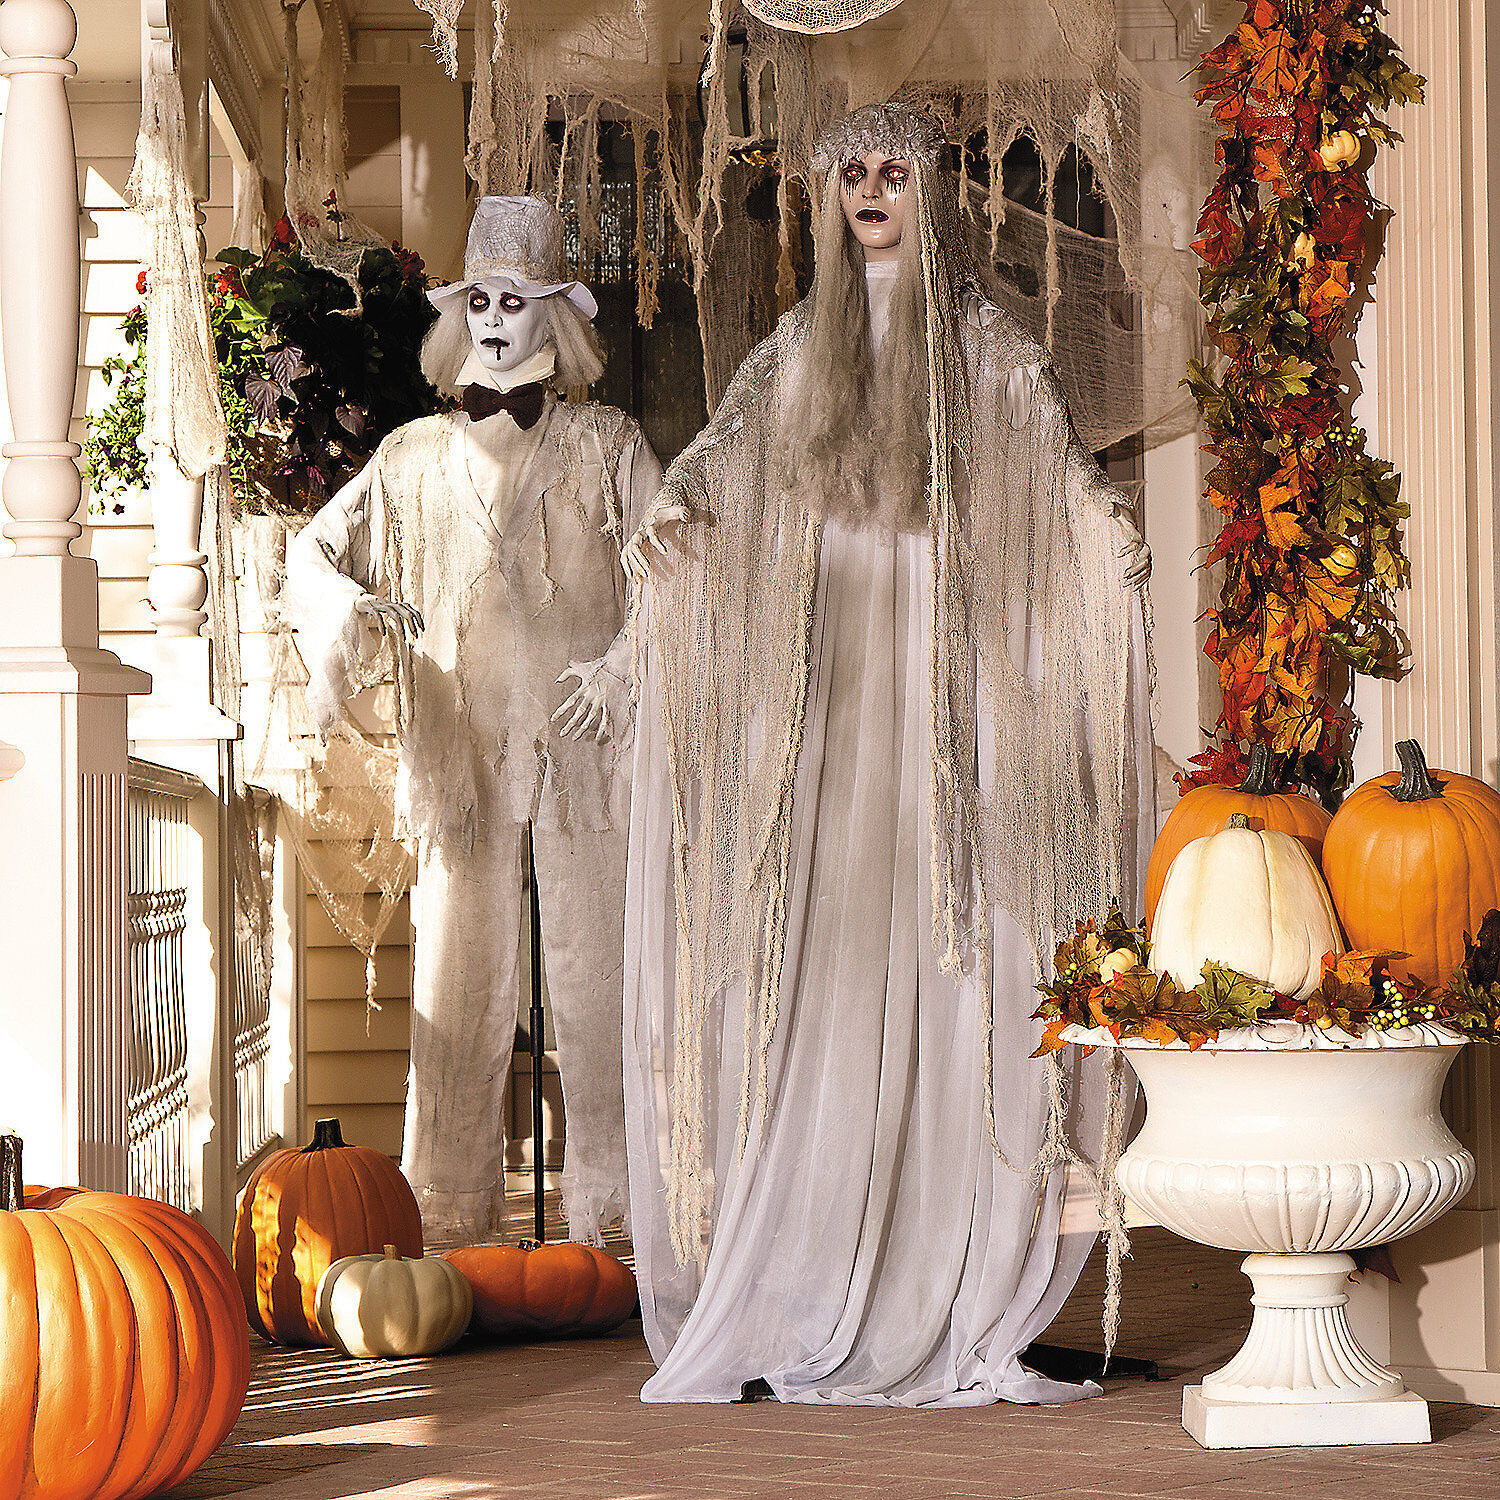 Buy Both & Save, Mr. & Mrs. Rot Halloween Decorations, Home Decor, 2 Pieces